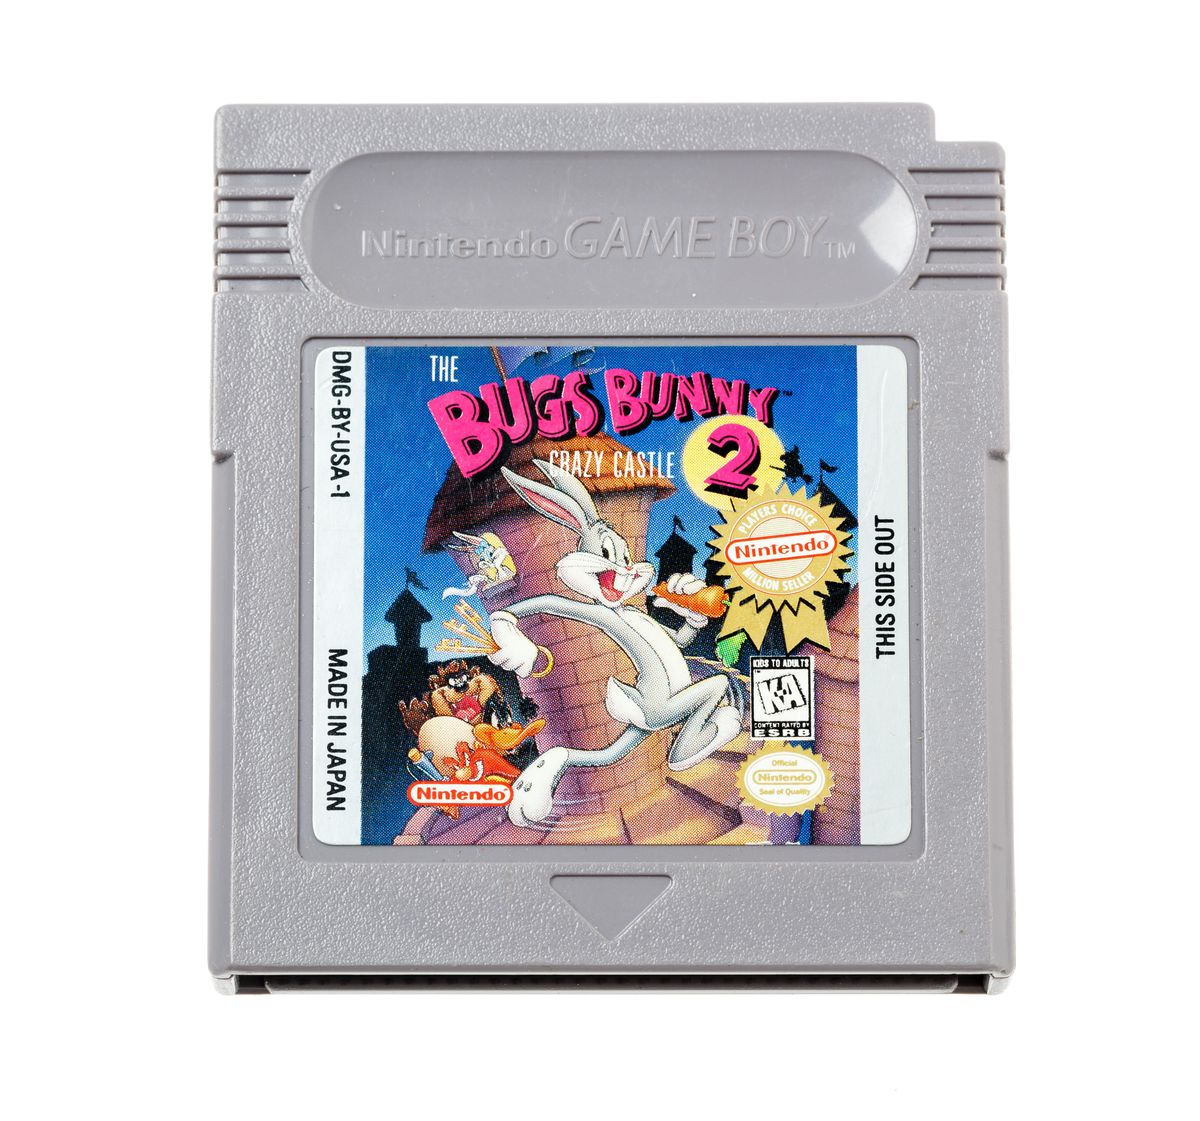 The Bugs Bunny Crazy Castle 2 Kopen | Gameboy Classic Games